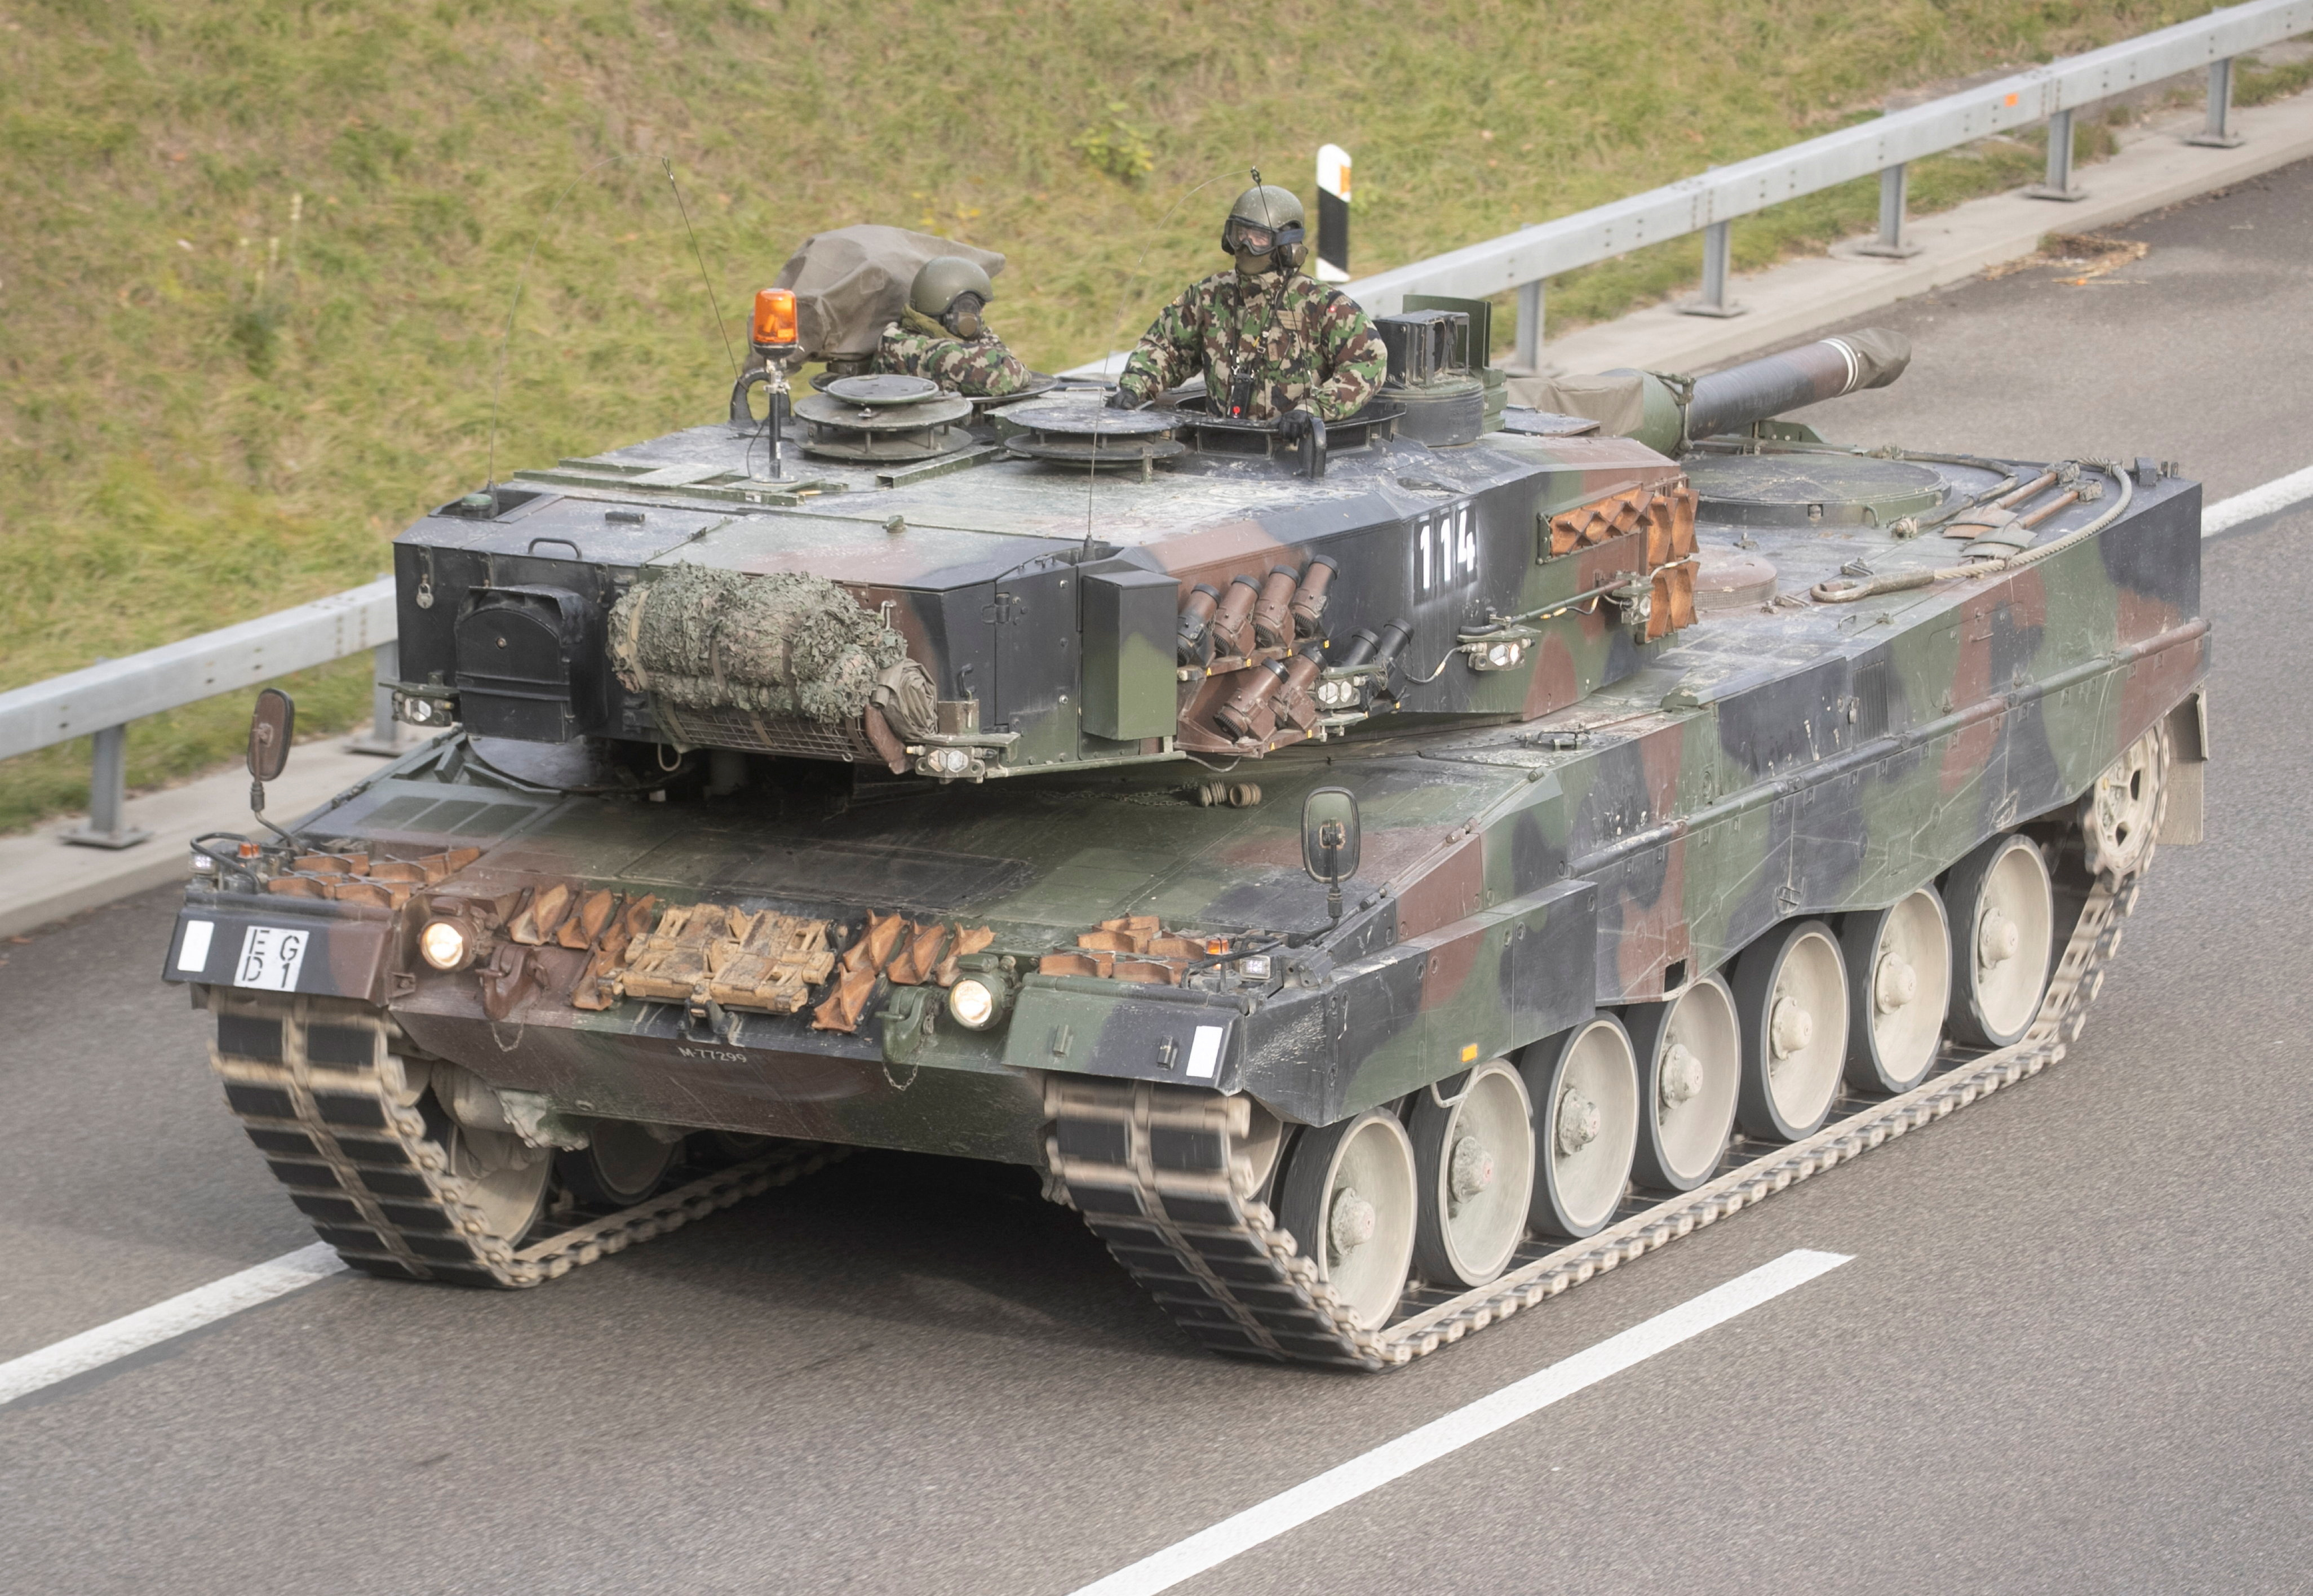 Vehicles of the Swiss Army take part in the military exercise 